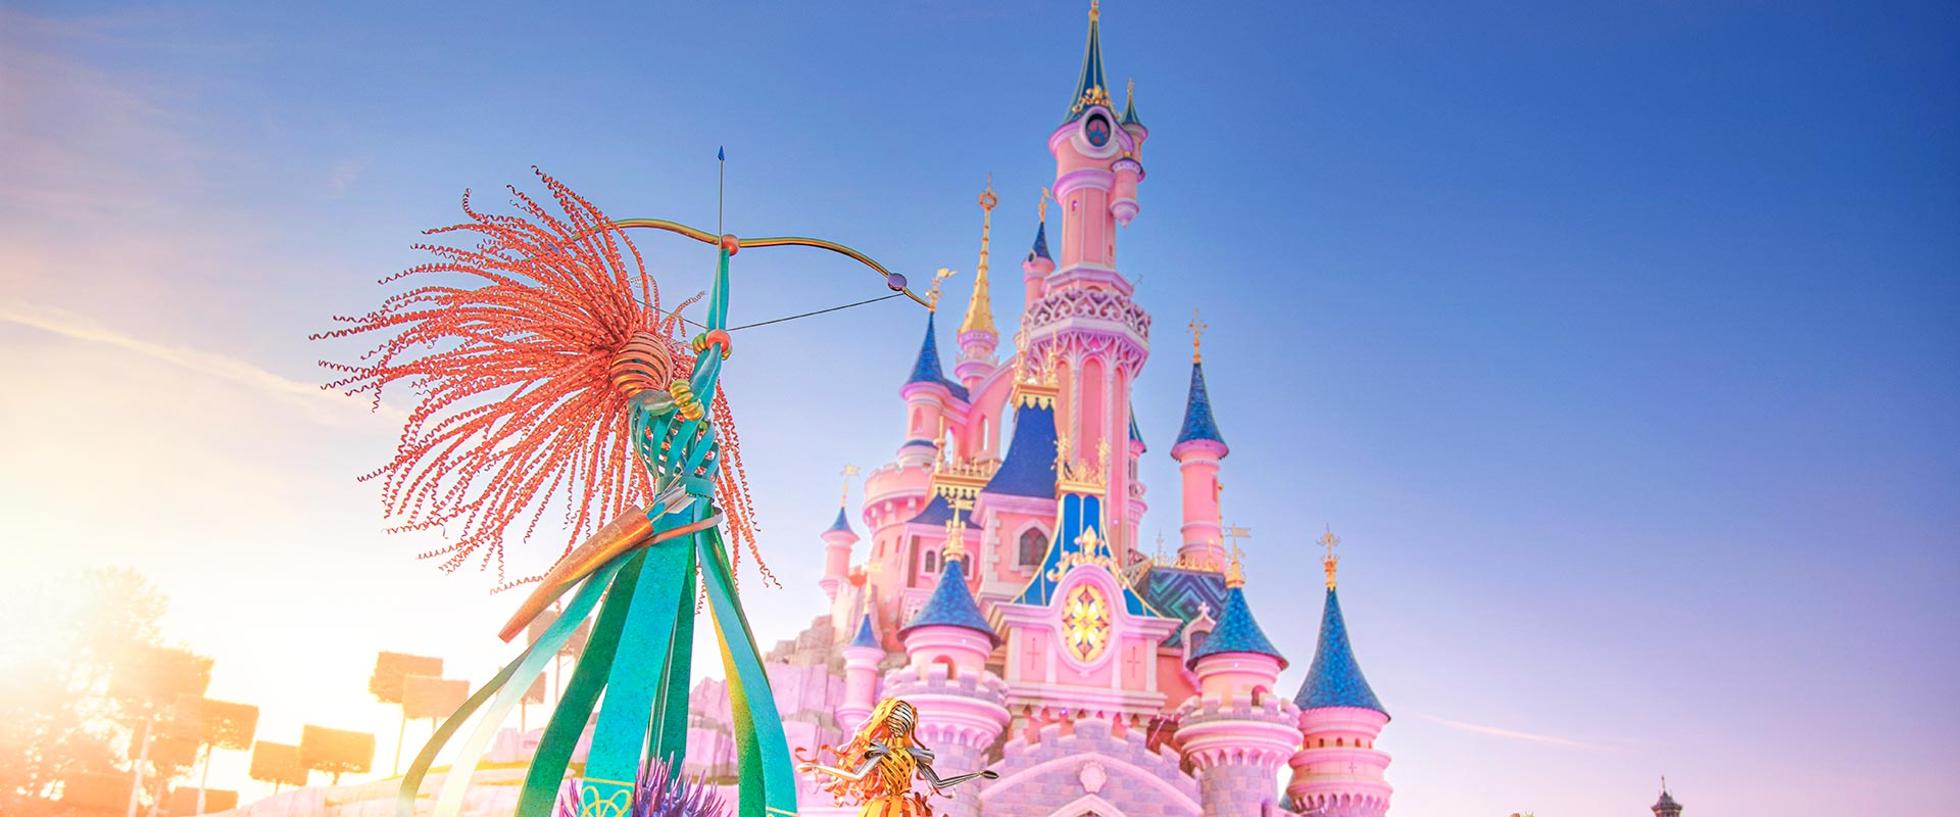 Who to book Disneyland Paris with?